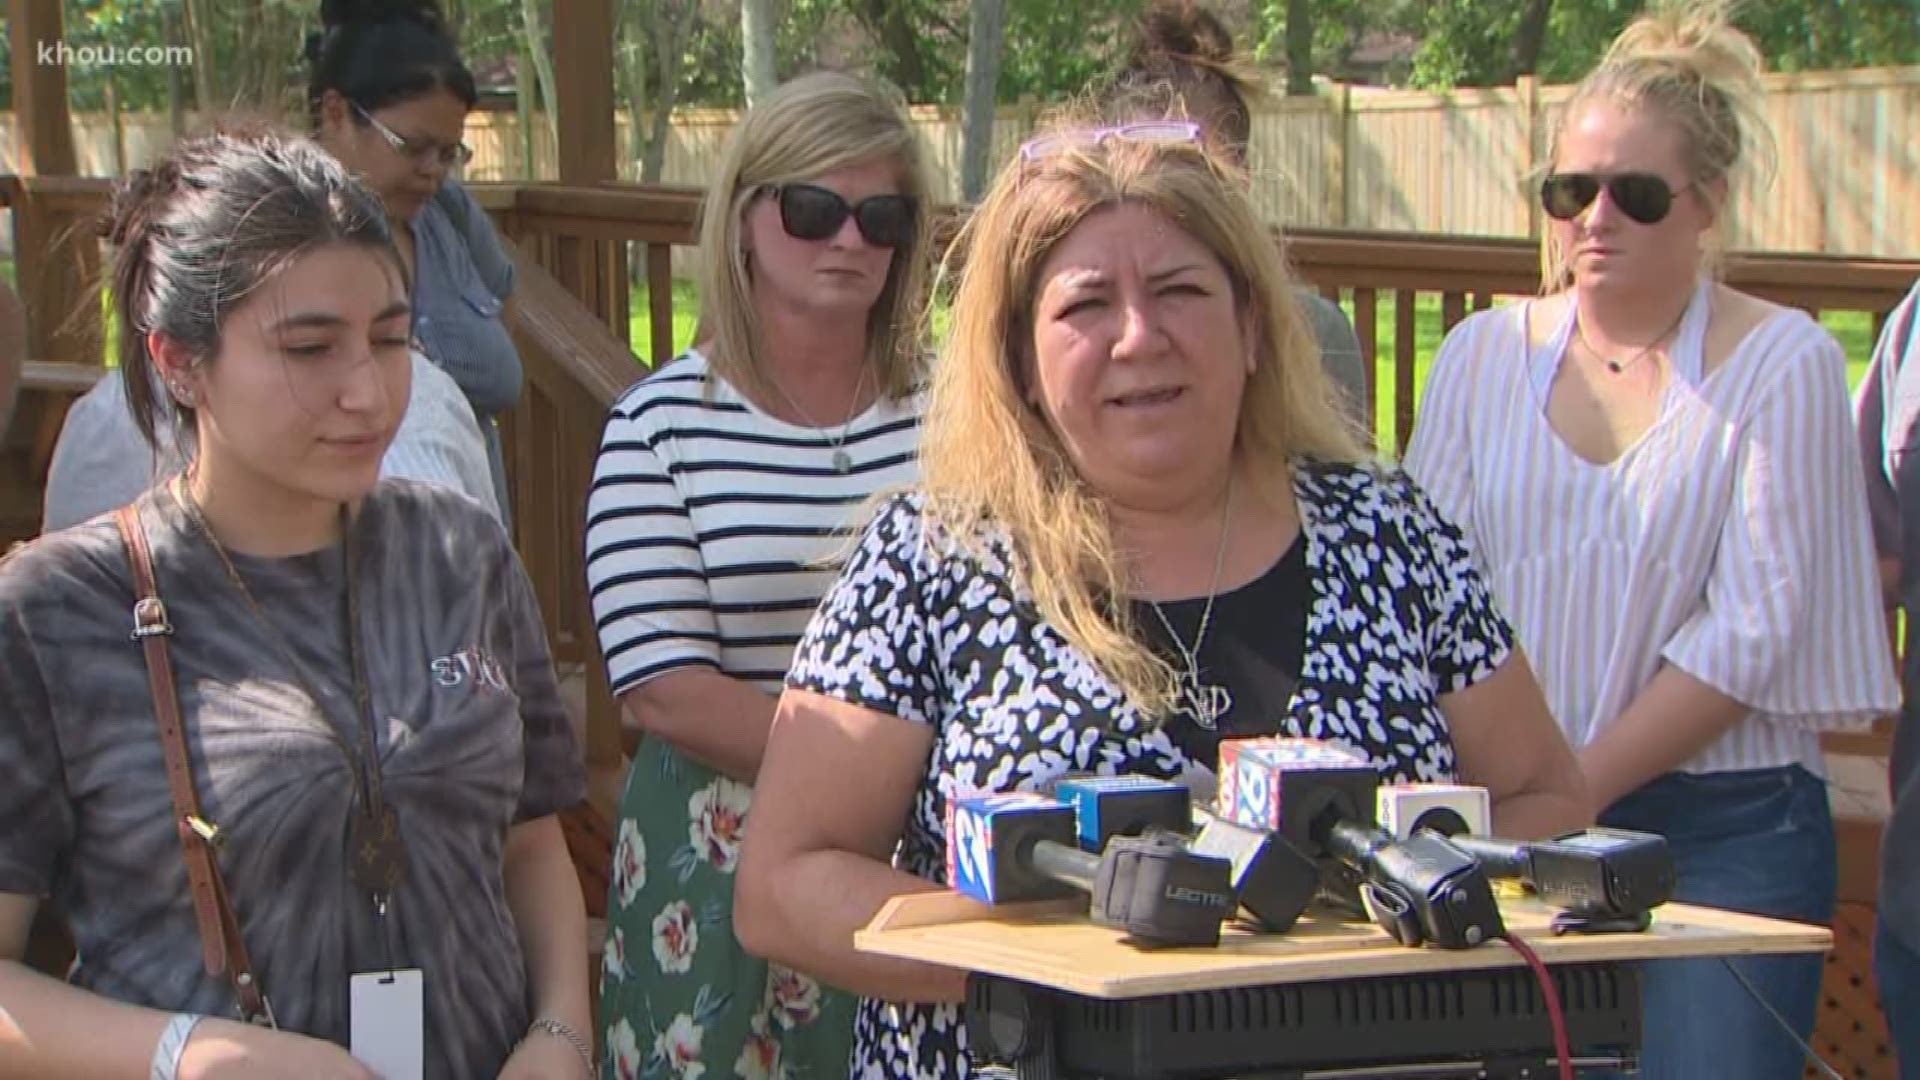 The accused Santa Fe shooter was hit with federal charges Monday. Standing united by a tragedy, Santa Fe families who have faced unimaginable loss and pain finally got word their one request was granted.